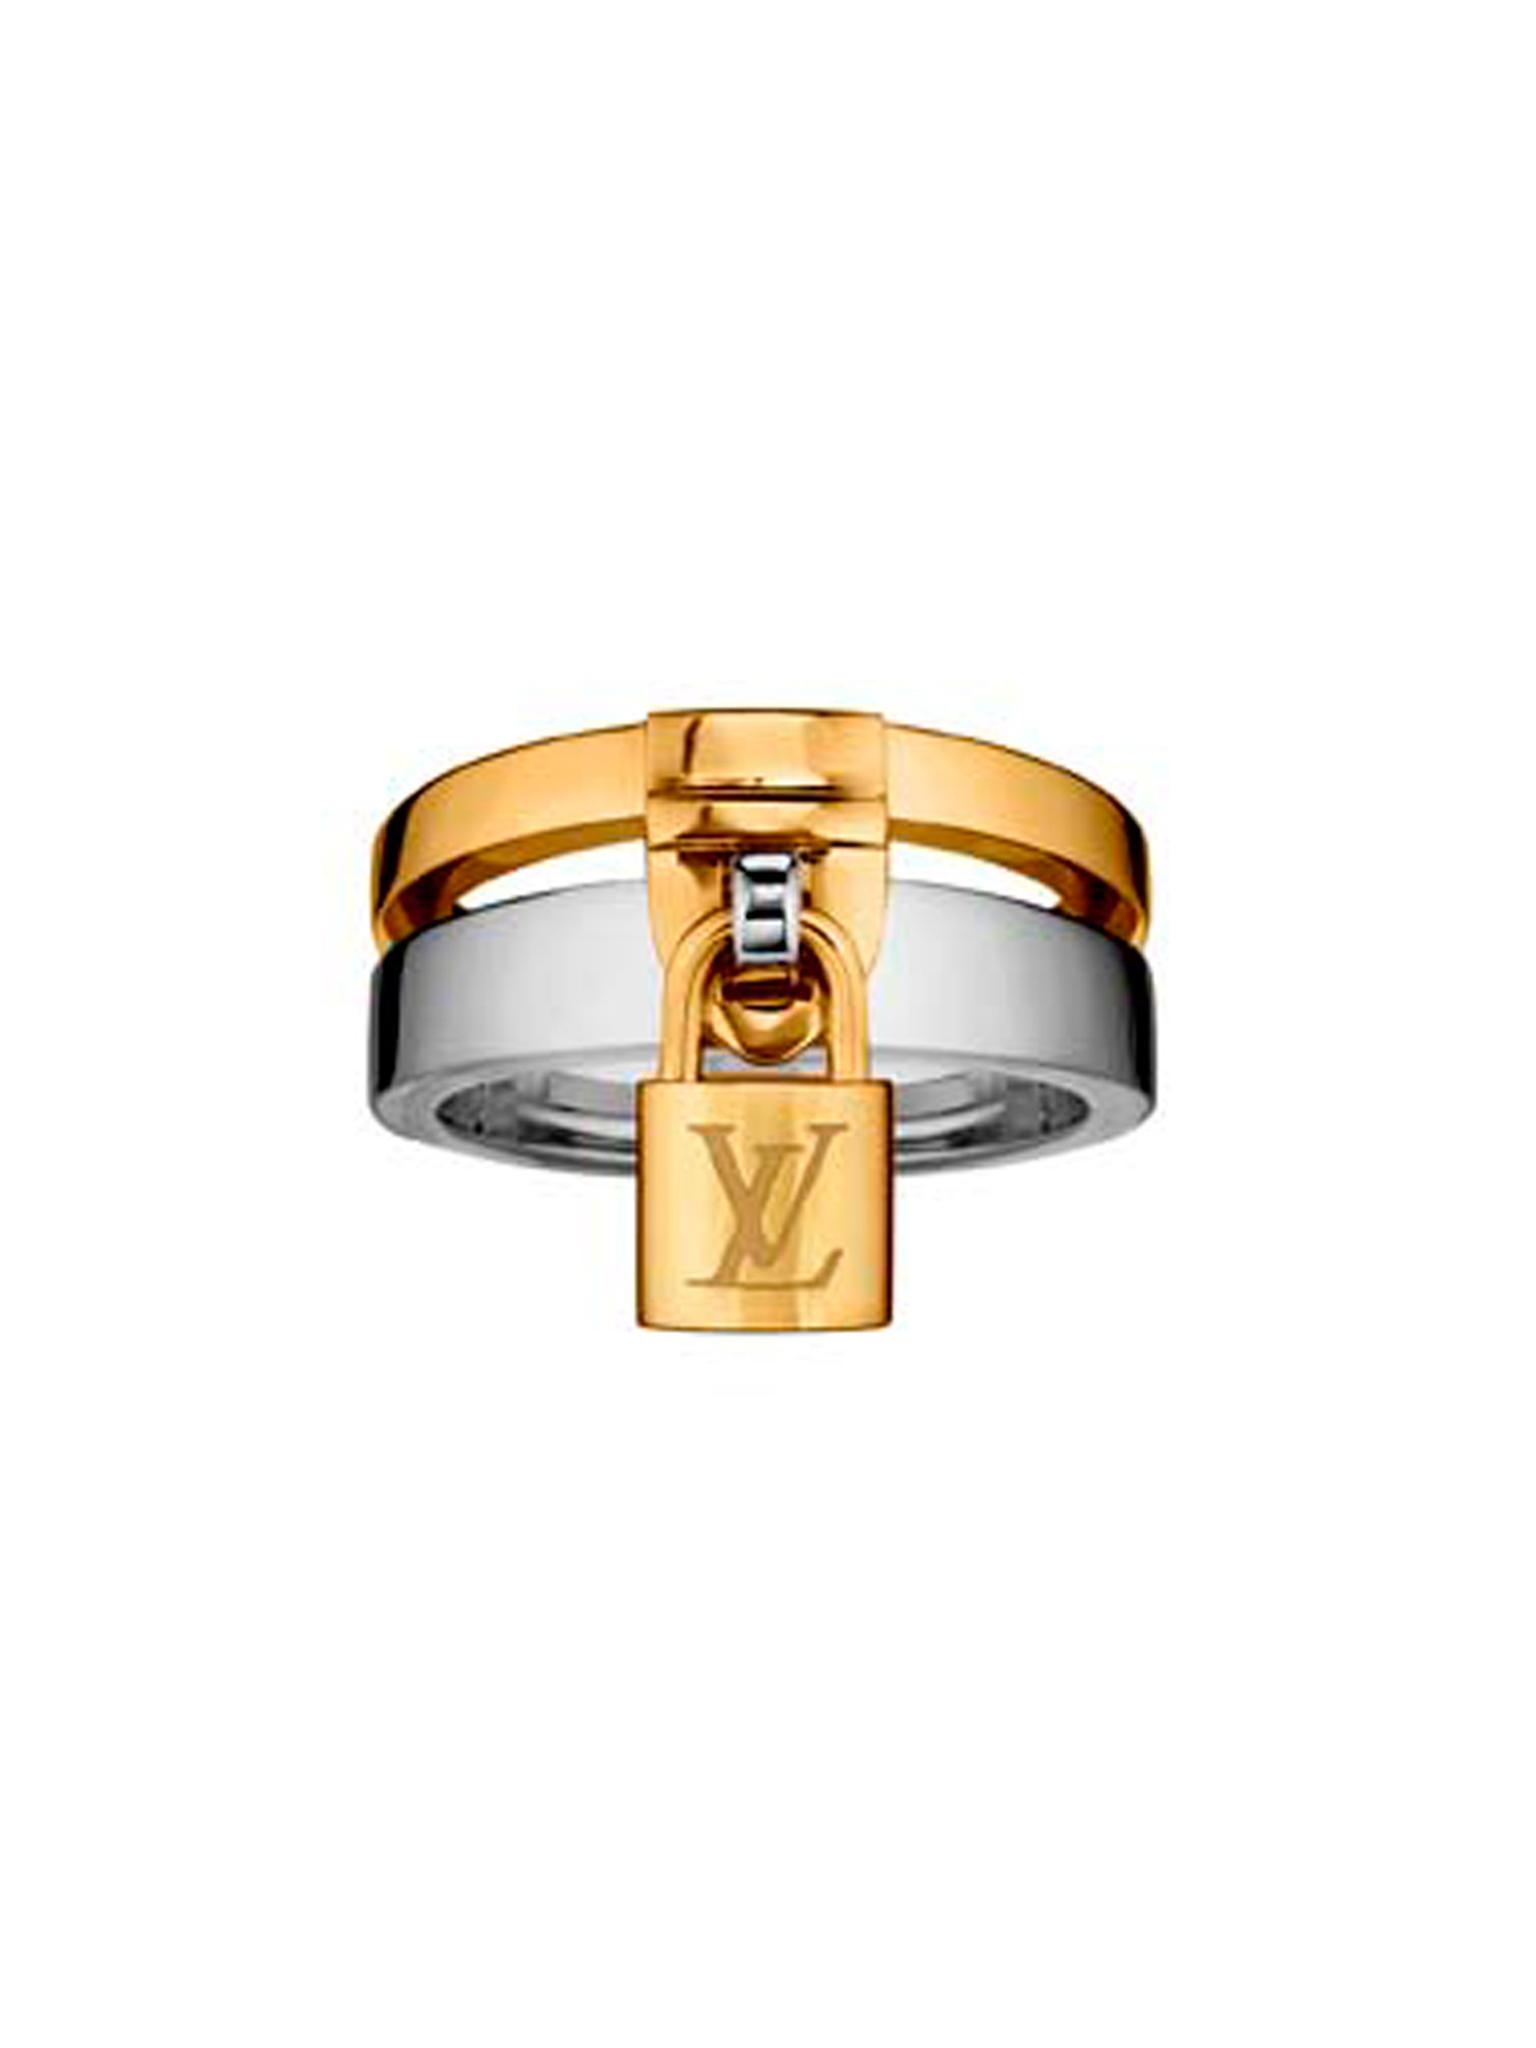 Louis Vuitton Lockit Ring - For Sale on 1stDibs